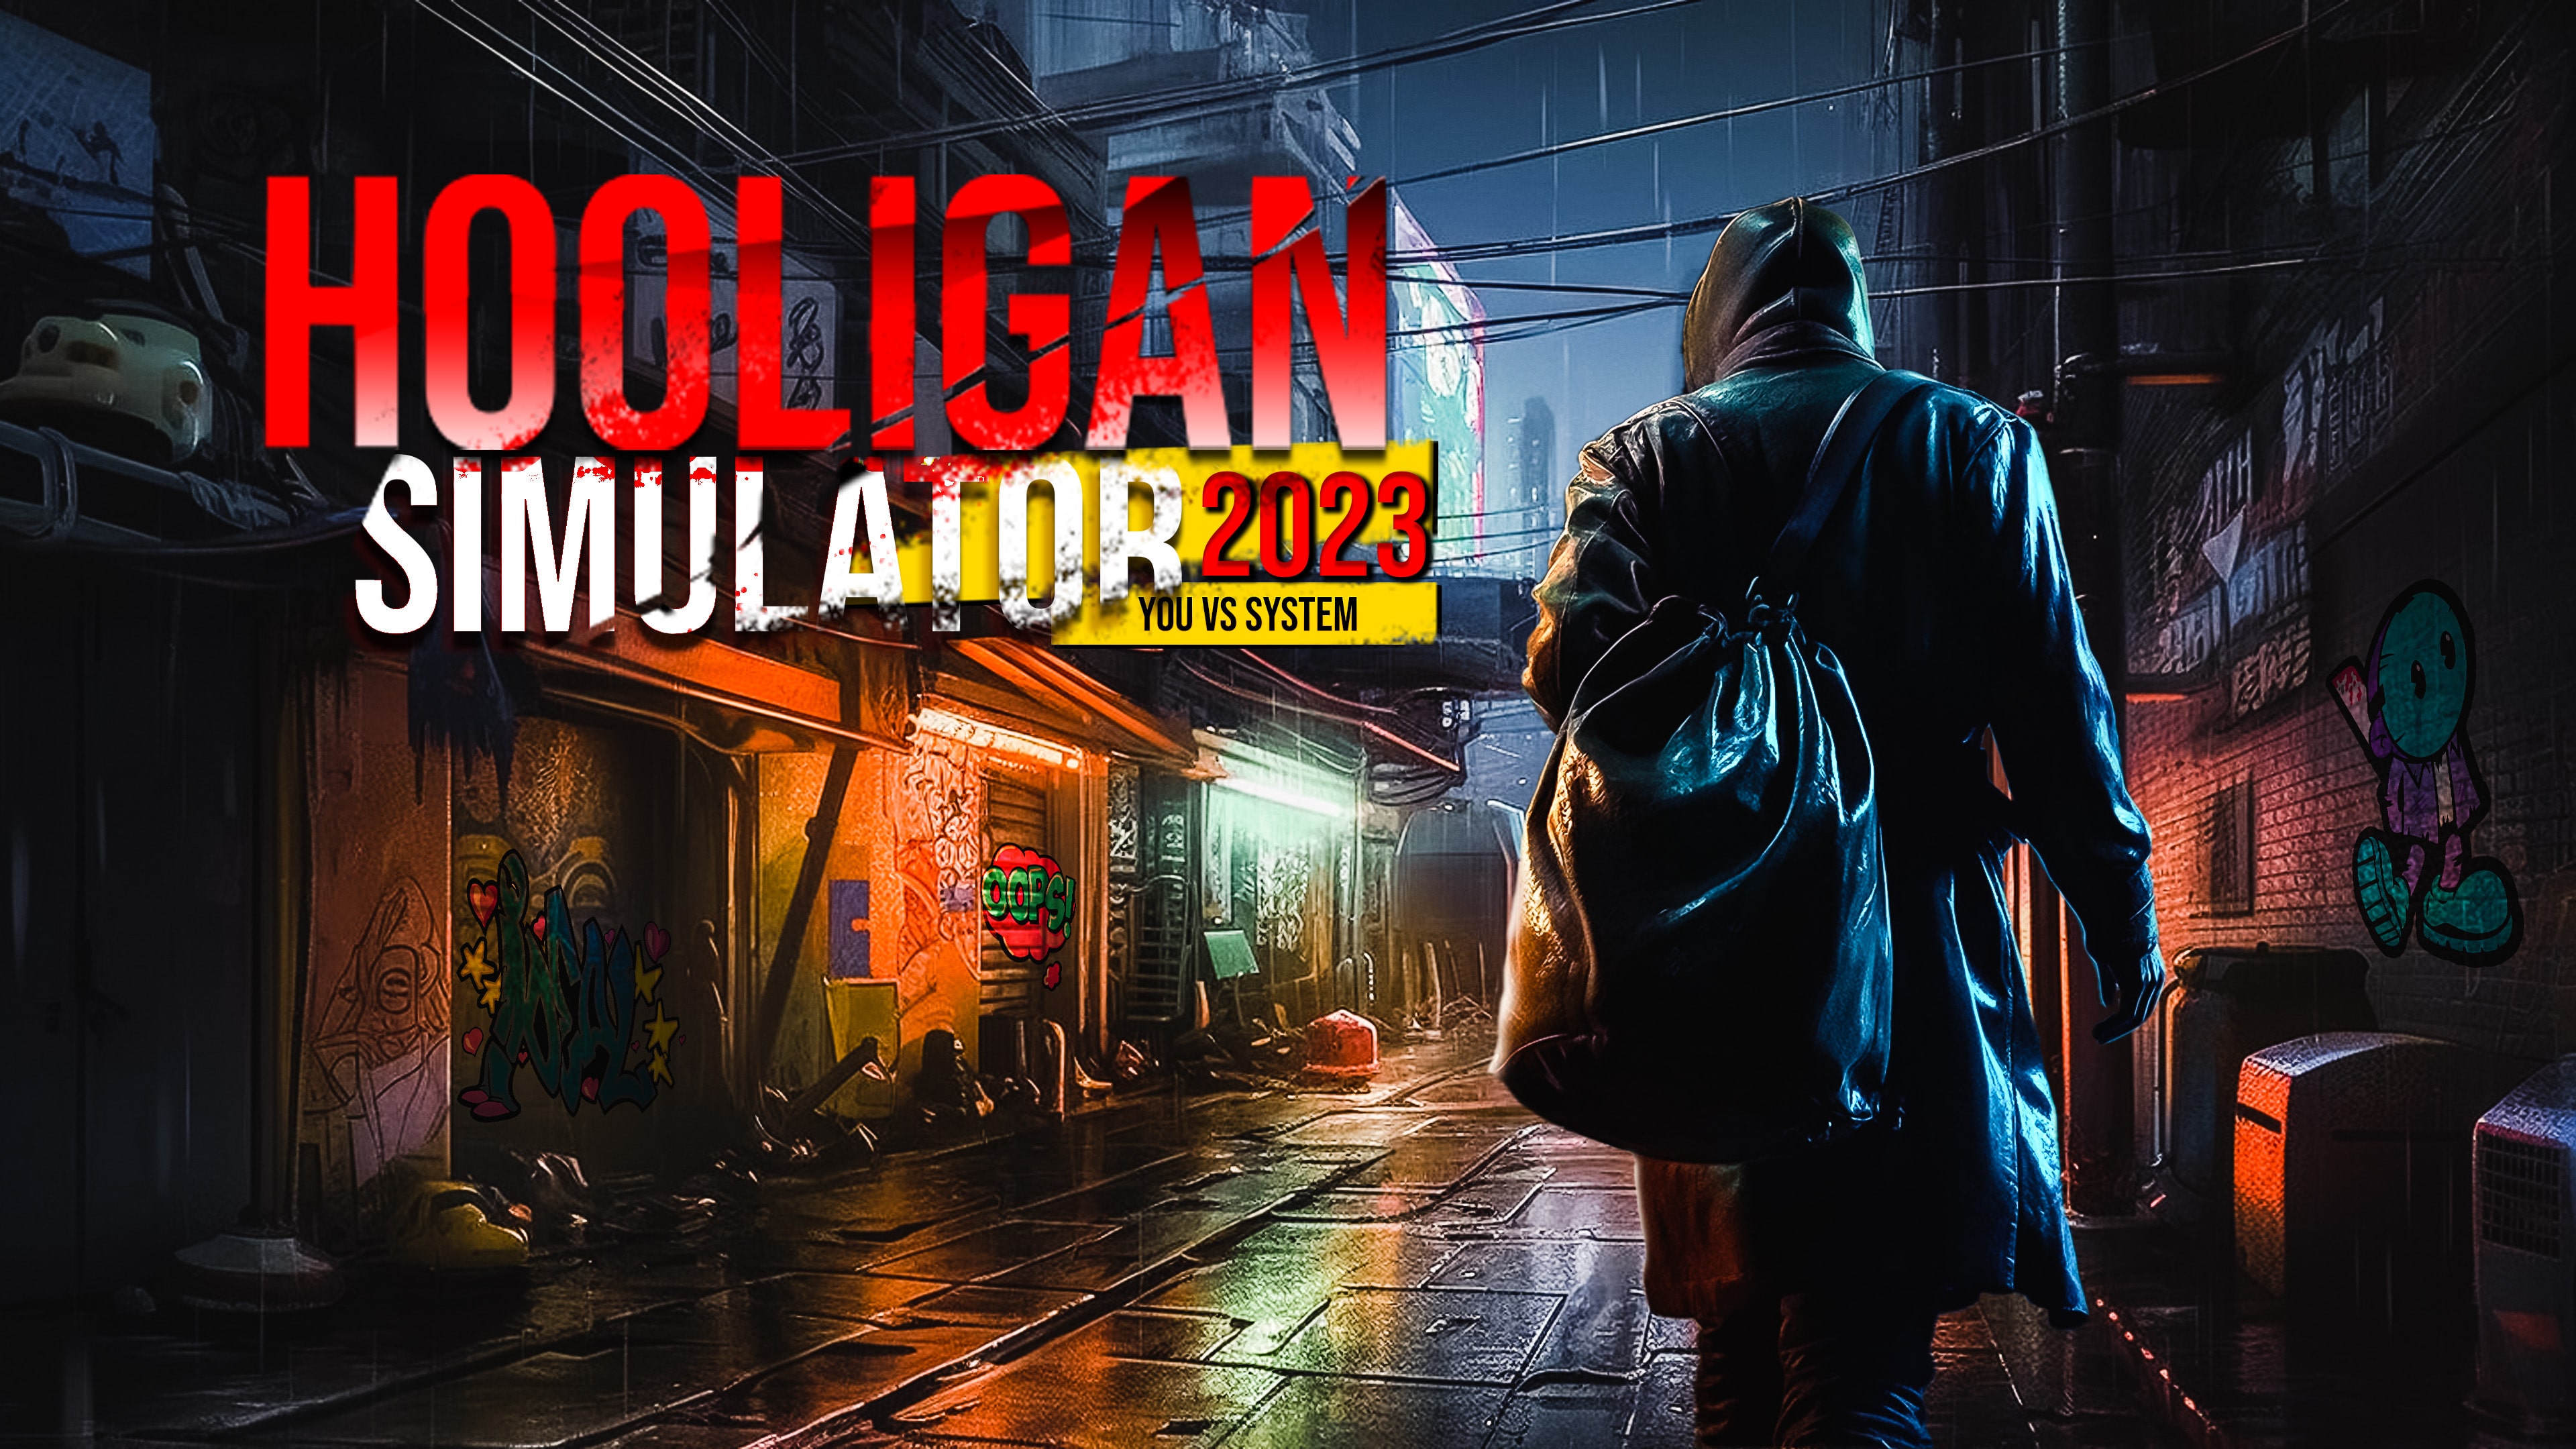 Hooligan Simulator - San Gangster Andreas Fight for City, Battle Gangs,  Shooter, Police for Nintendo Switch - Nintendo Official Site